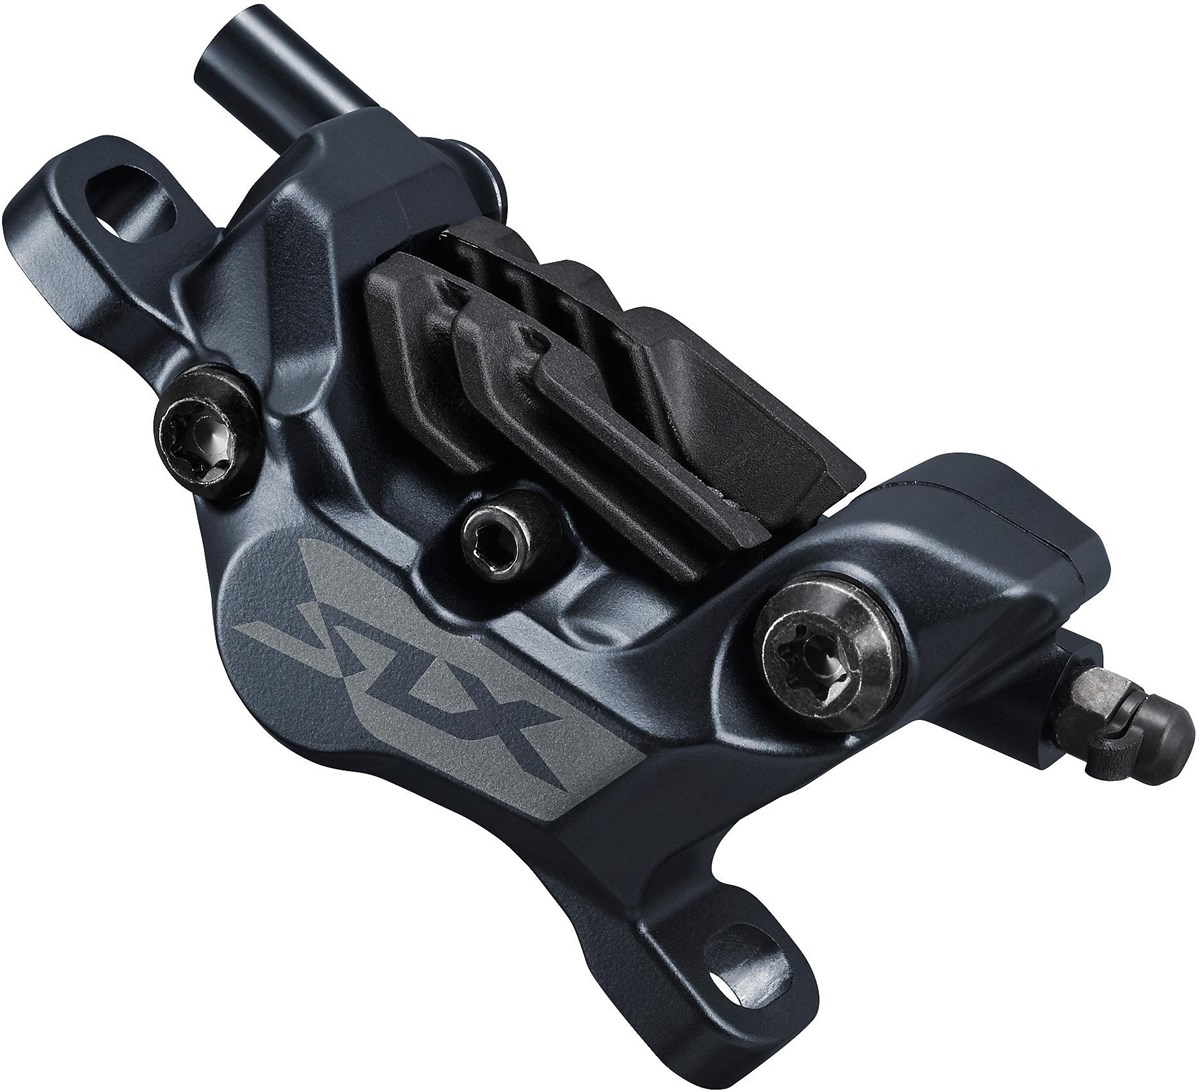 Shimano SLX M7120 4 Piston Post Mount Calliper without Rotor or Adapters product image